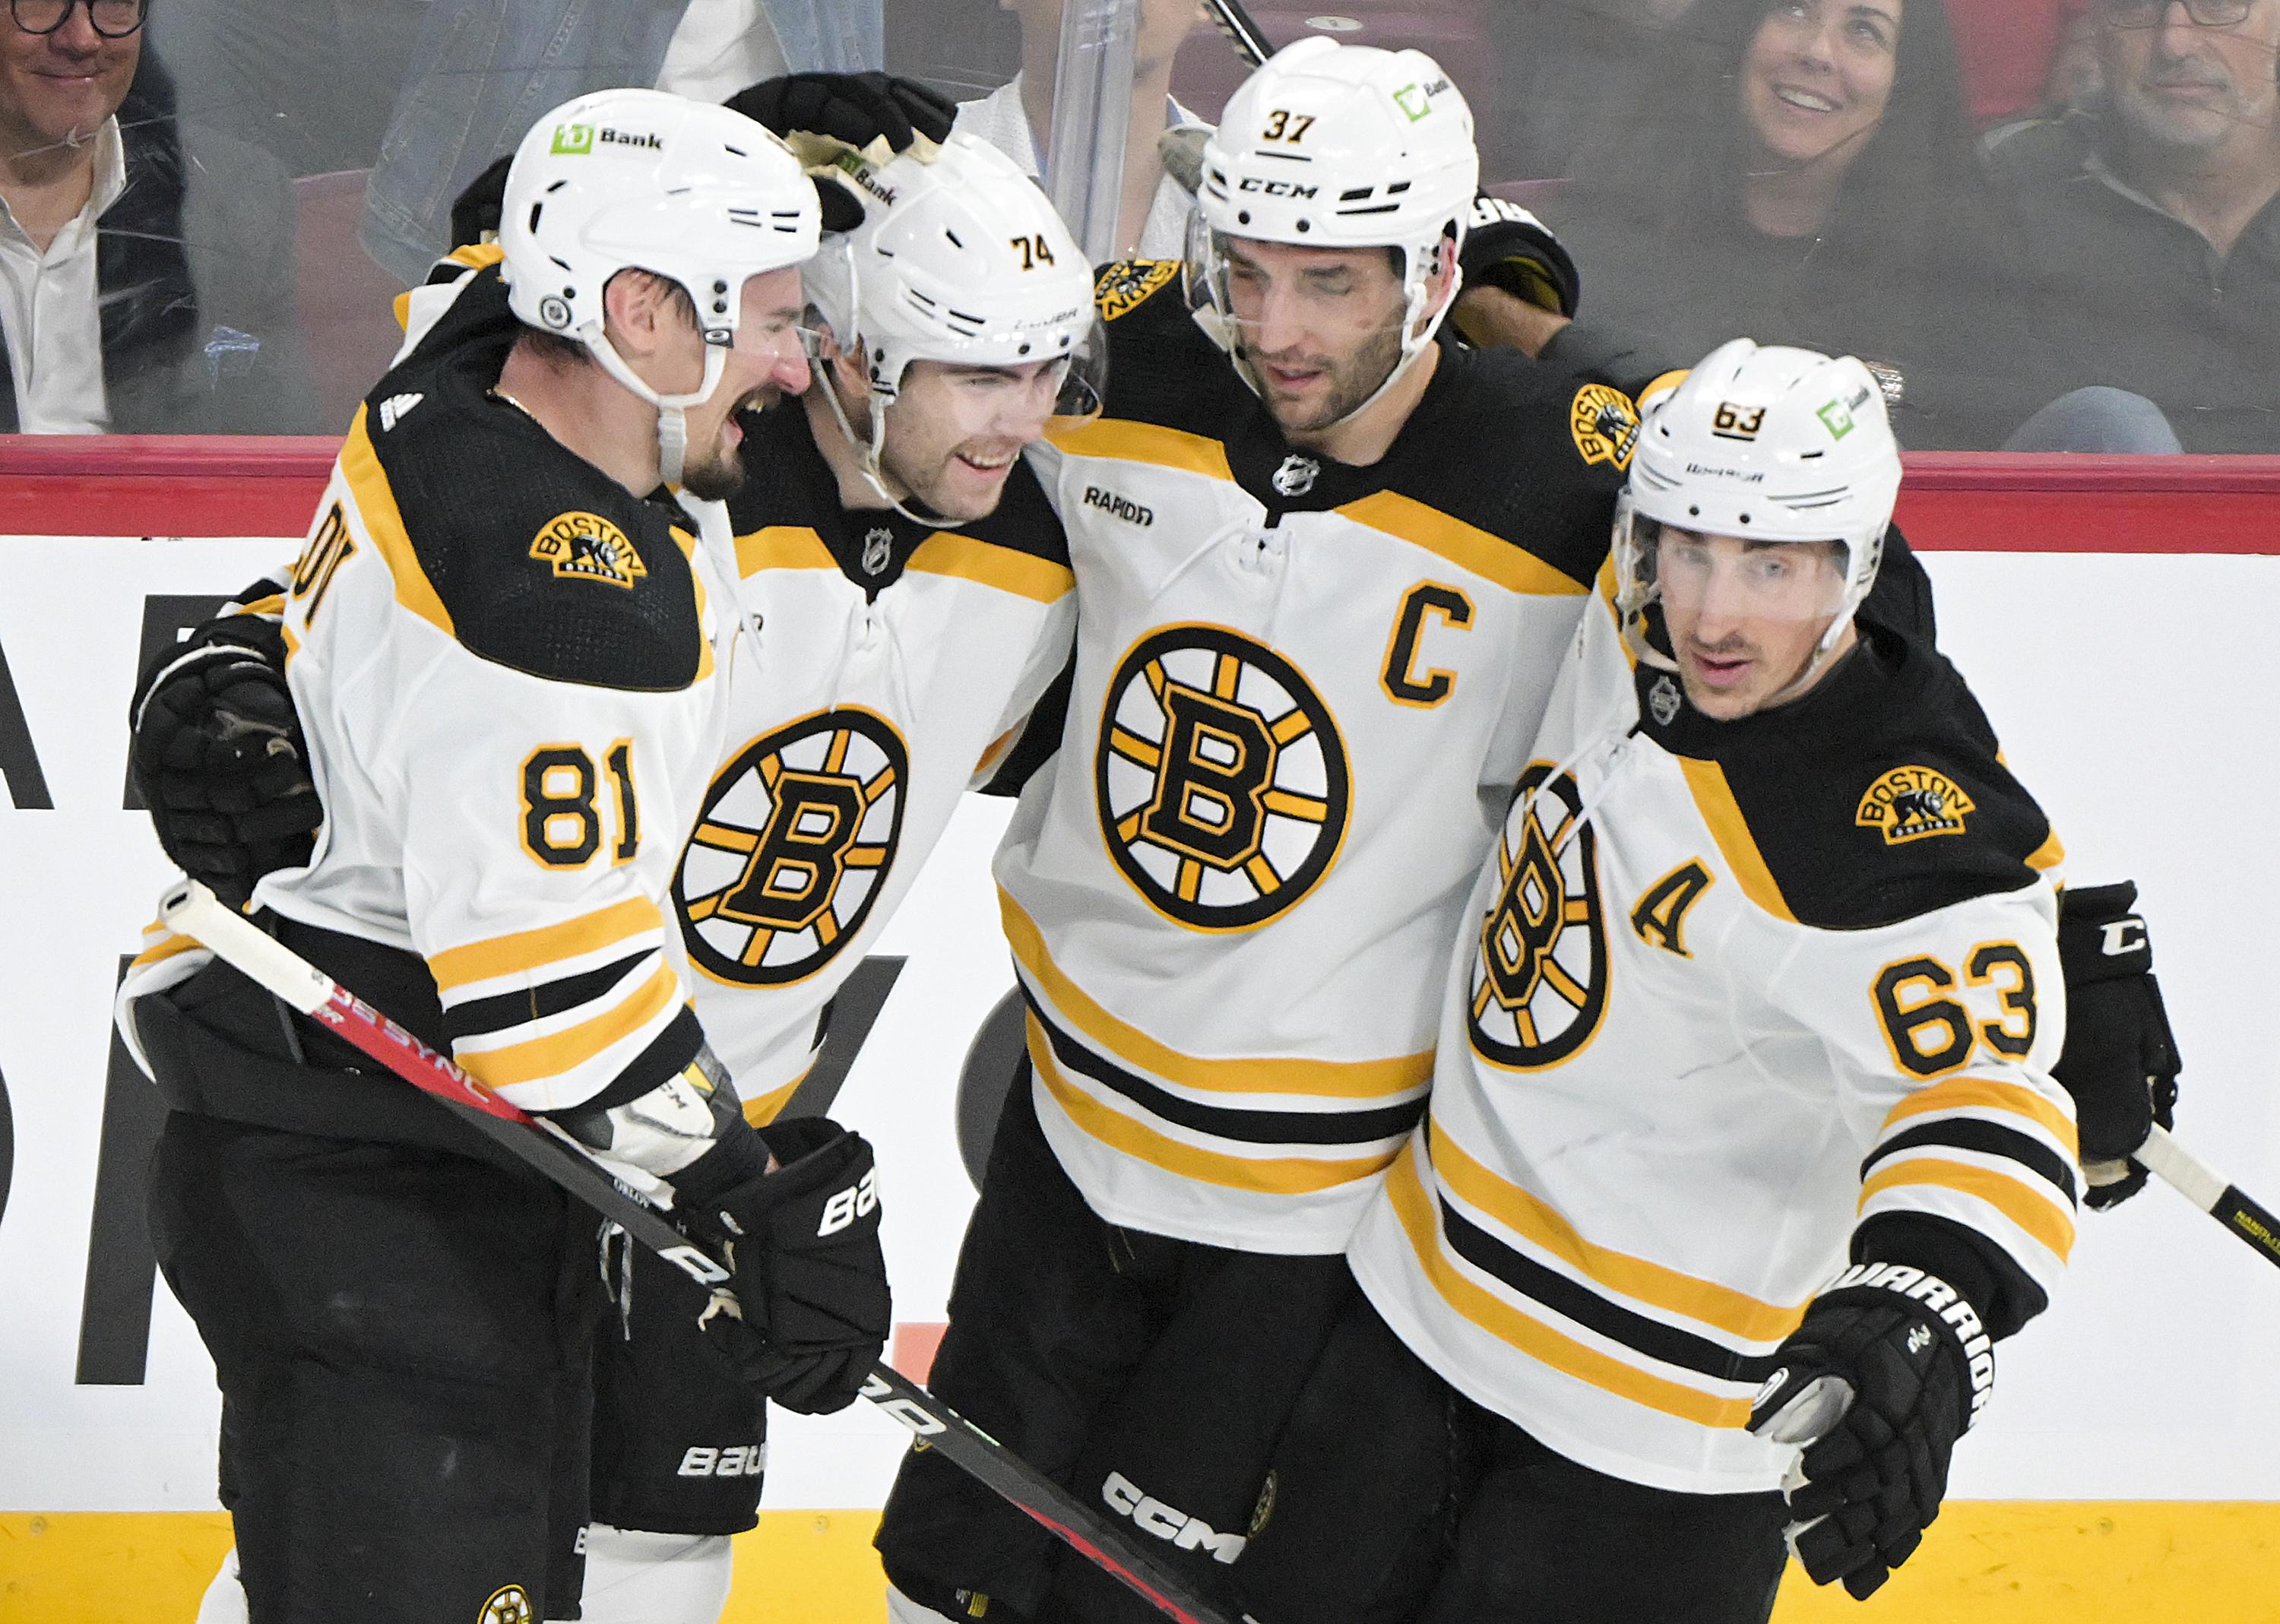 NHL playoffs: Can anyone in the East beat the Boston Bruins?